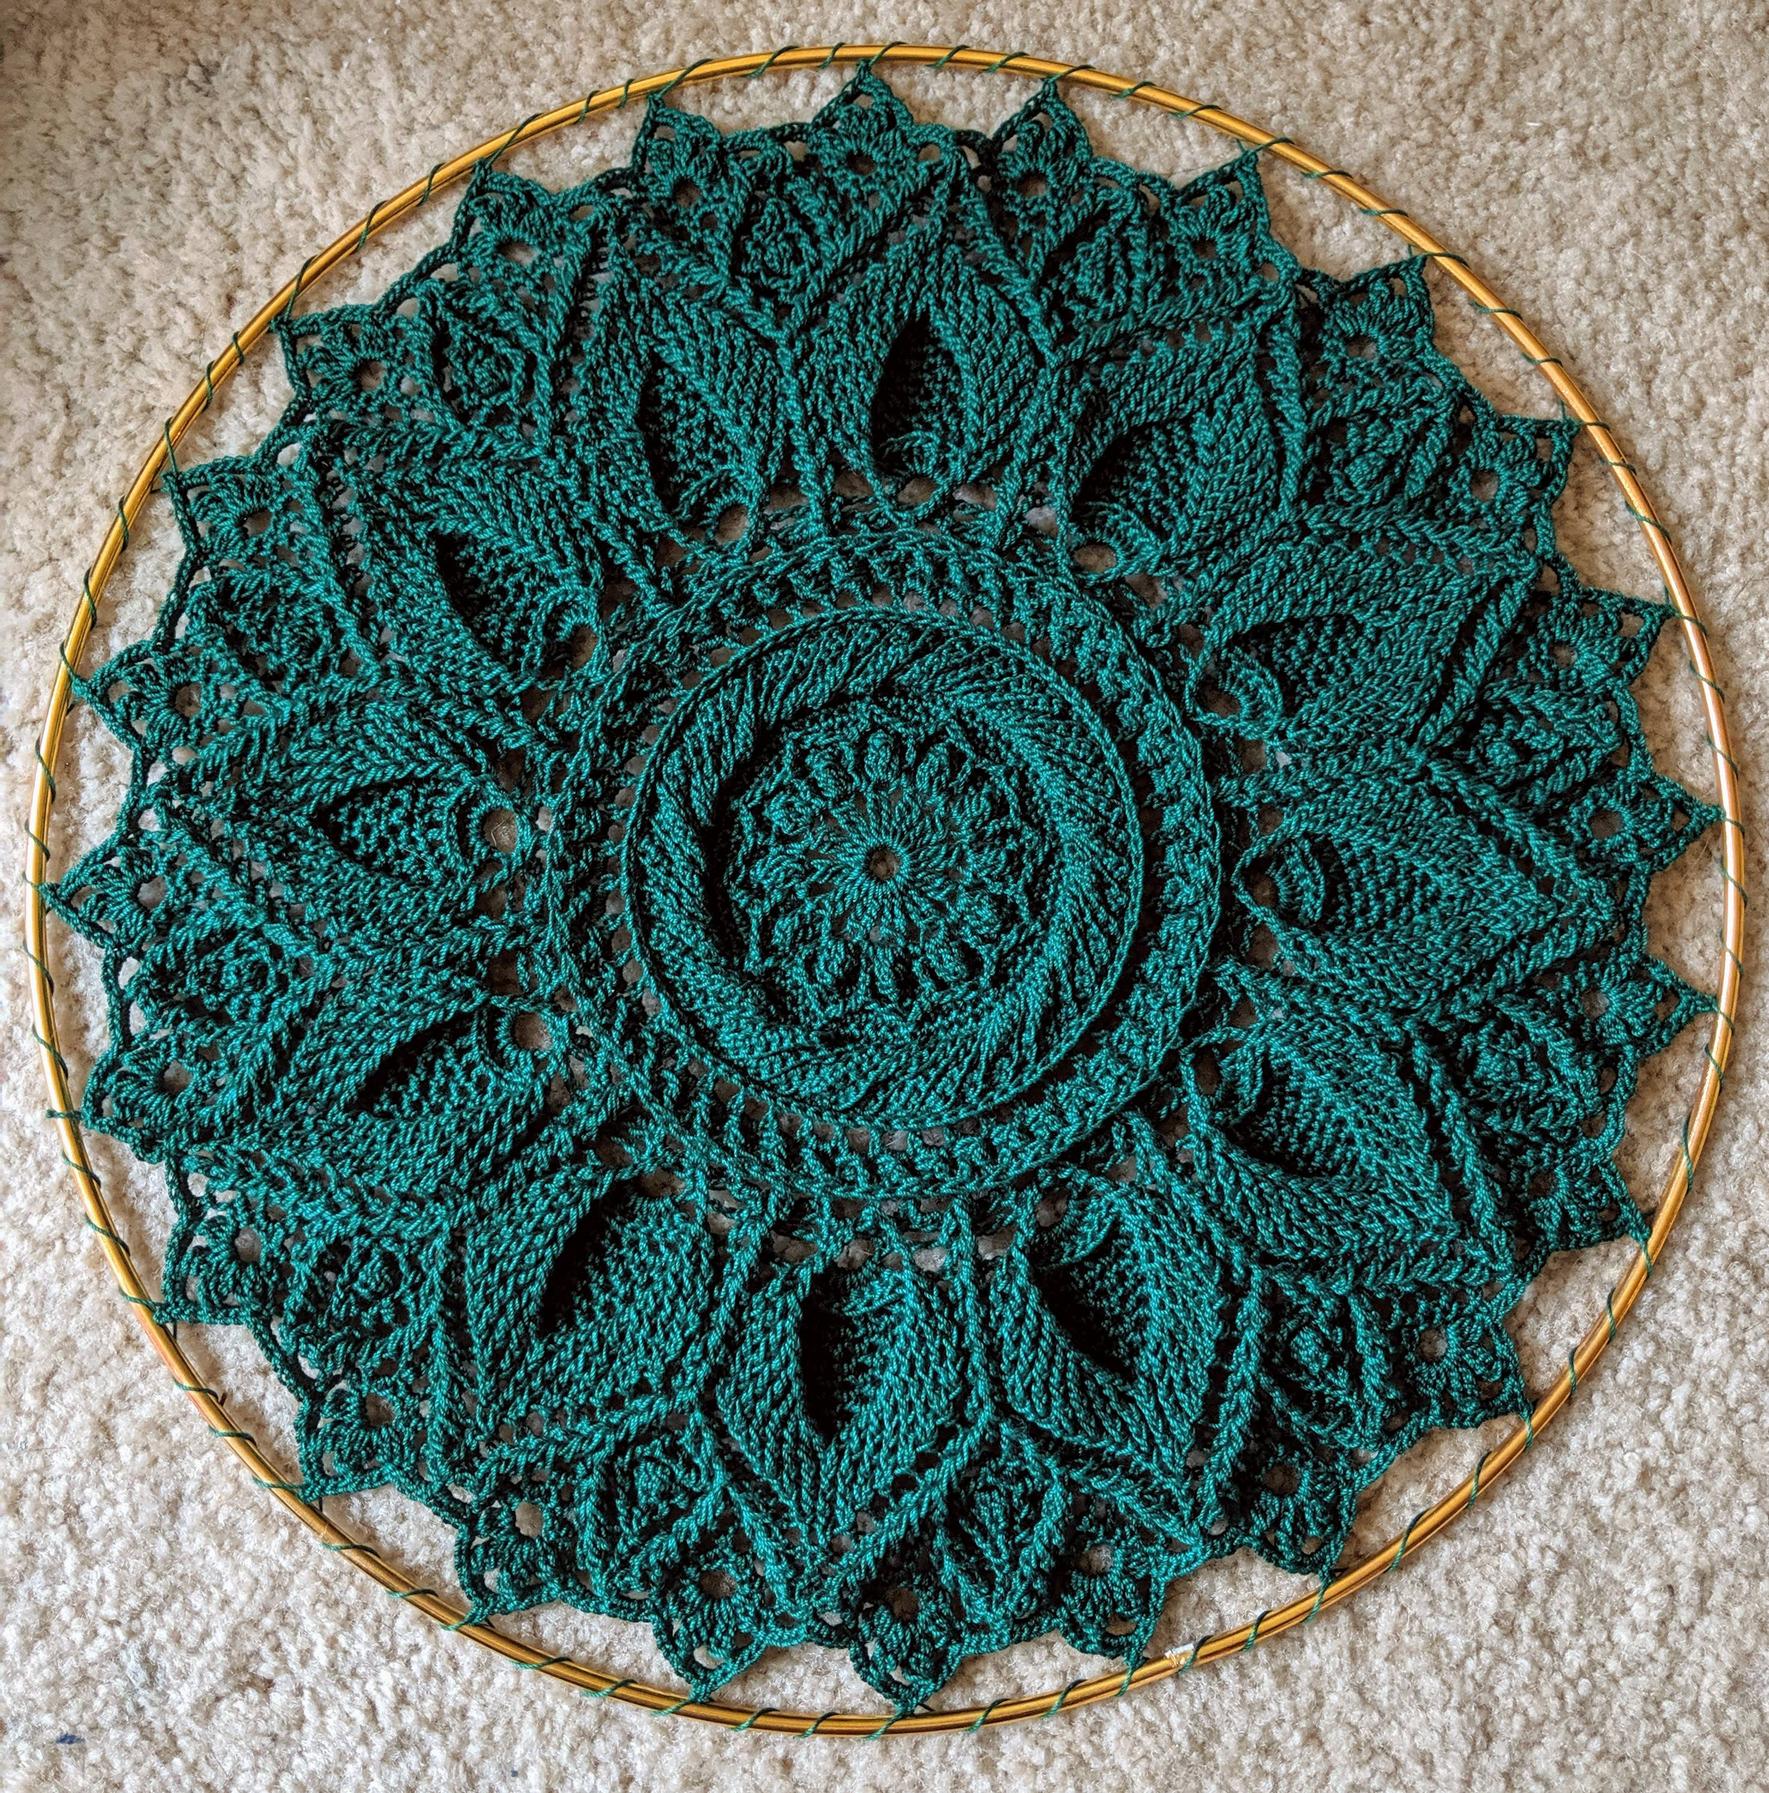 Ulita doily I finished yesterday, mounted in a gold ring